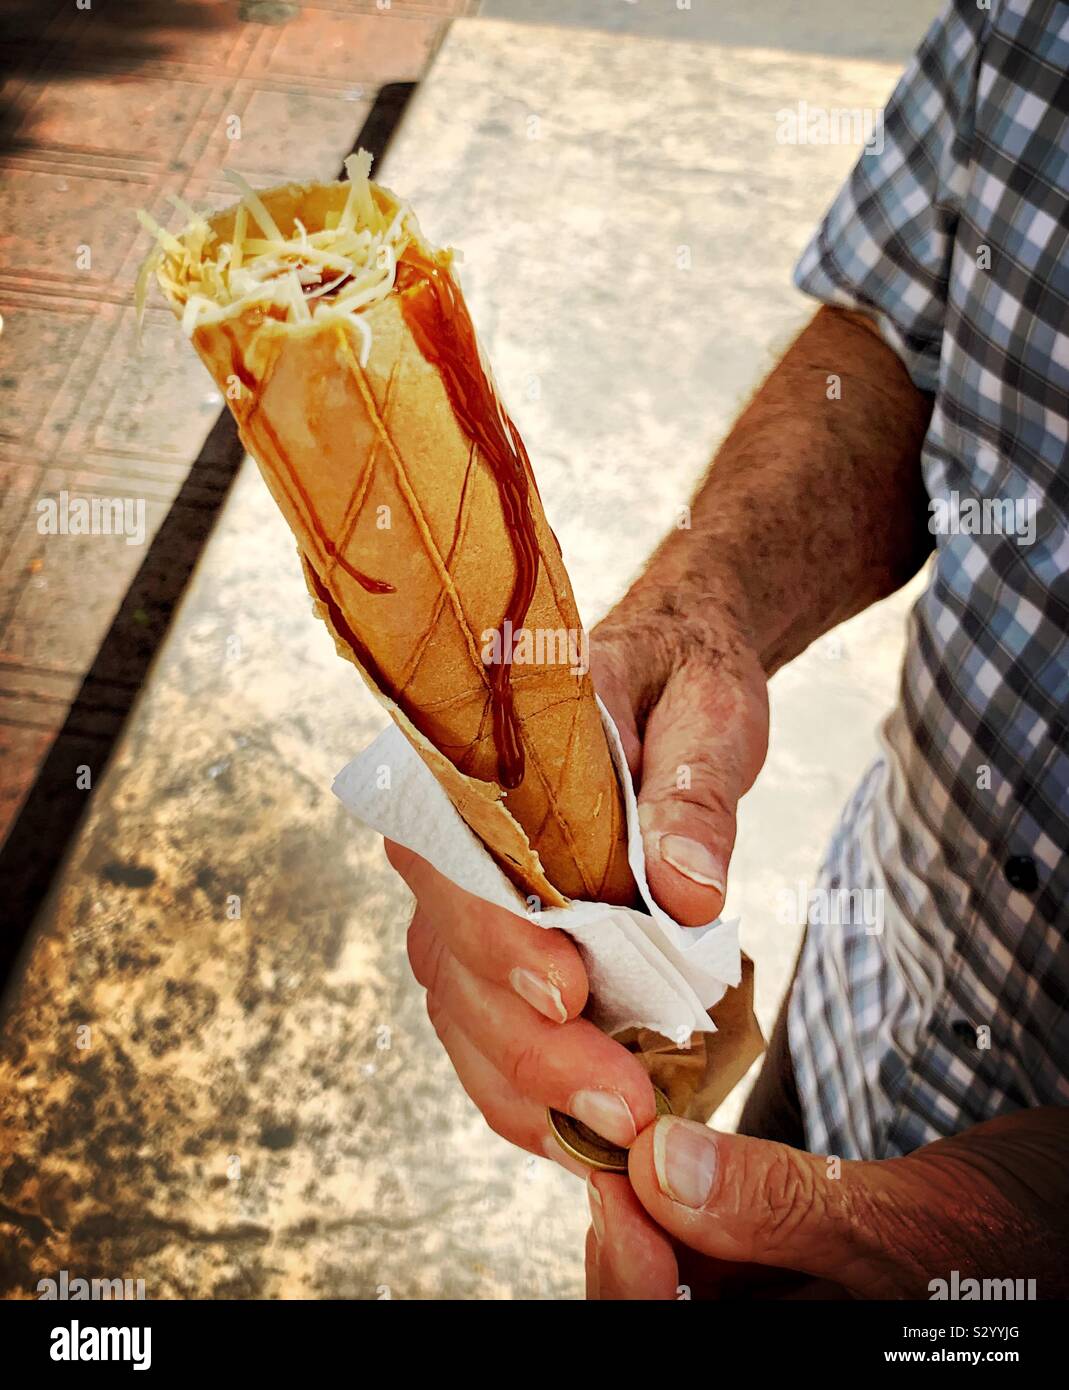 A man holds a sweet and savory Marquesita, a crunchy filled crepe like snack that originated in Mérida. Stock Photo